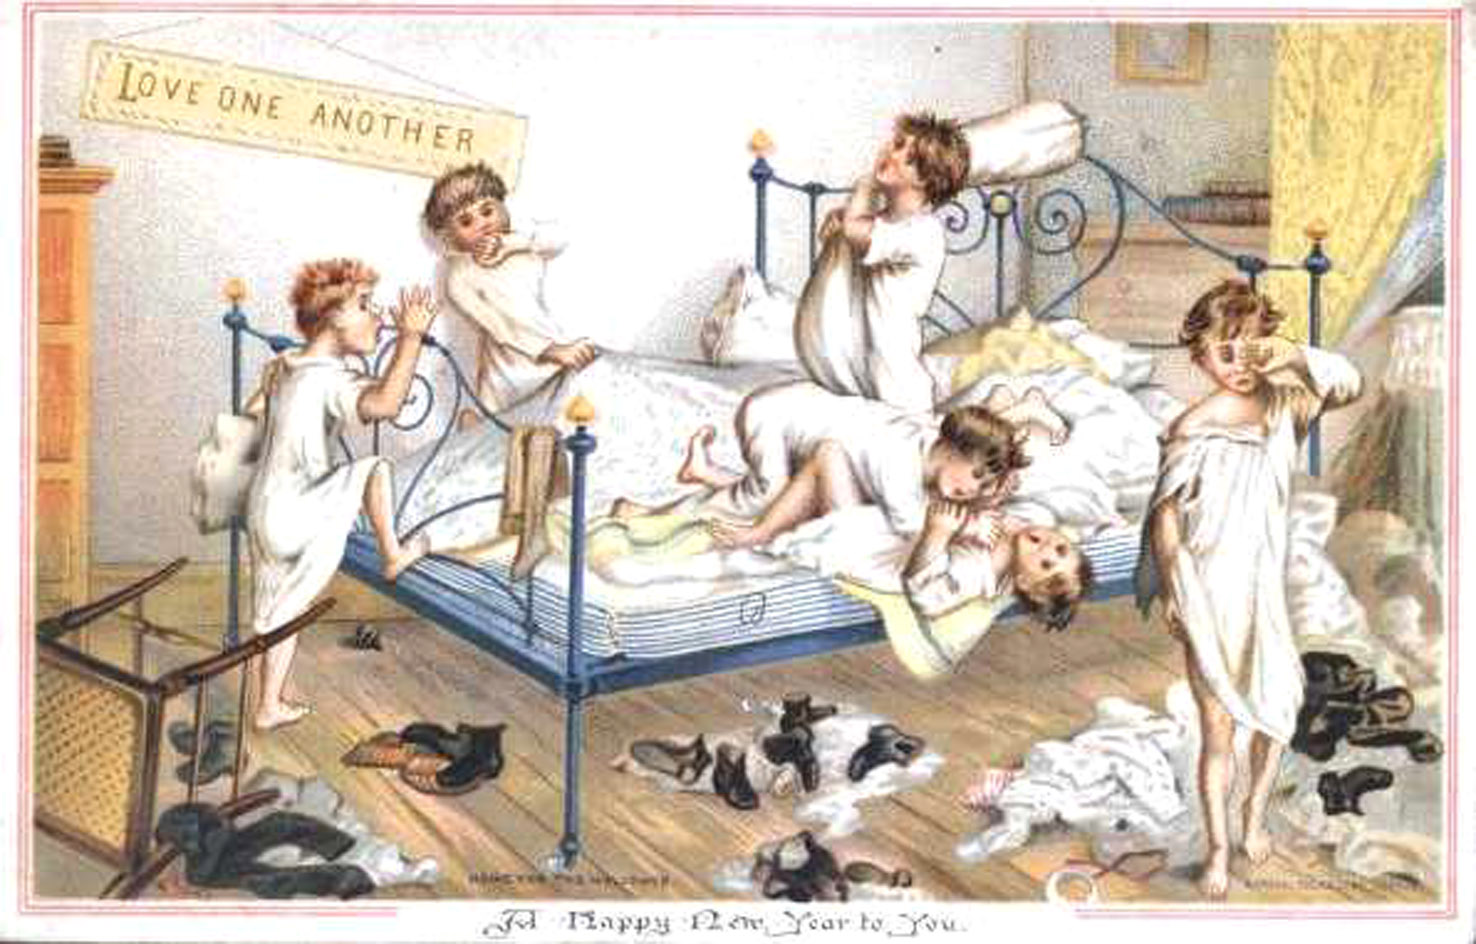 Boys in bedroom 1881 - No 02 in series of four amusing vintage Christmas cards